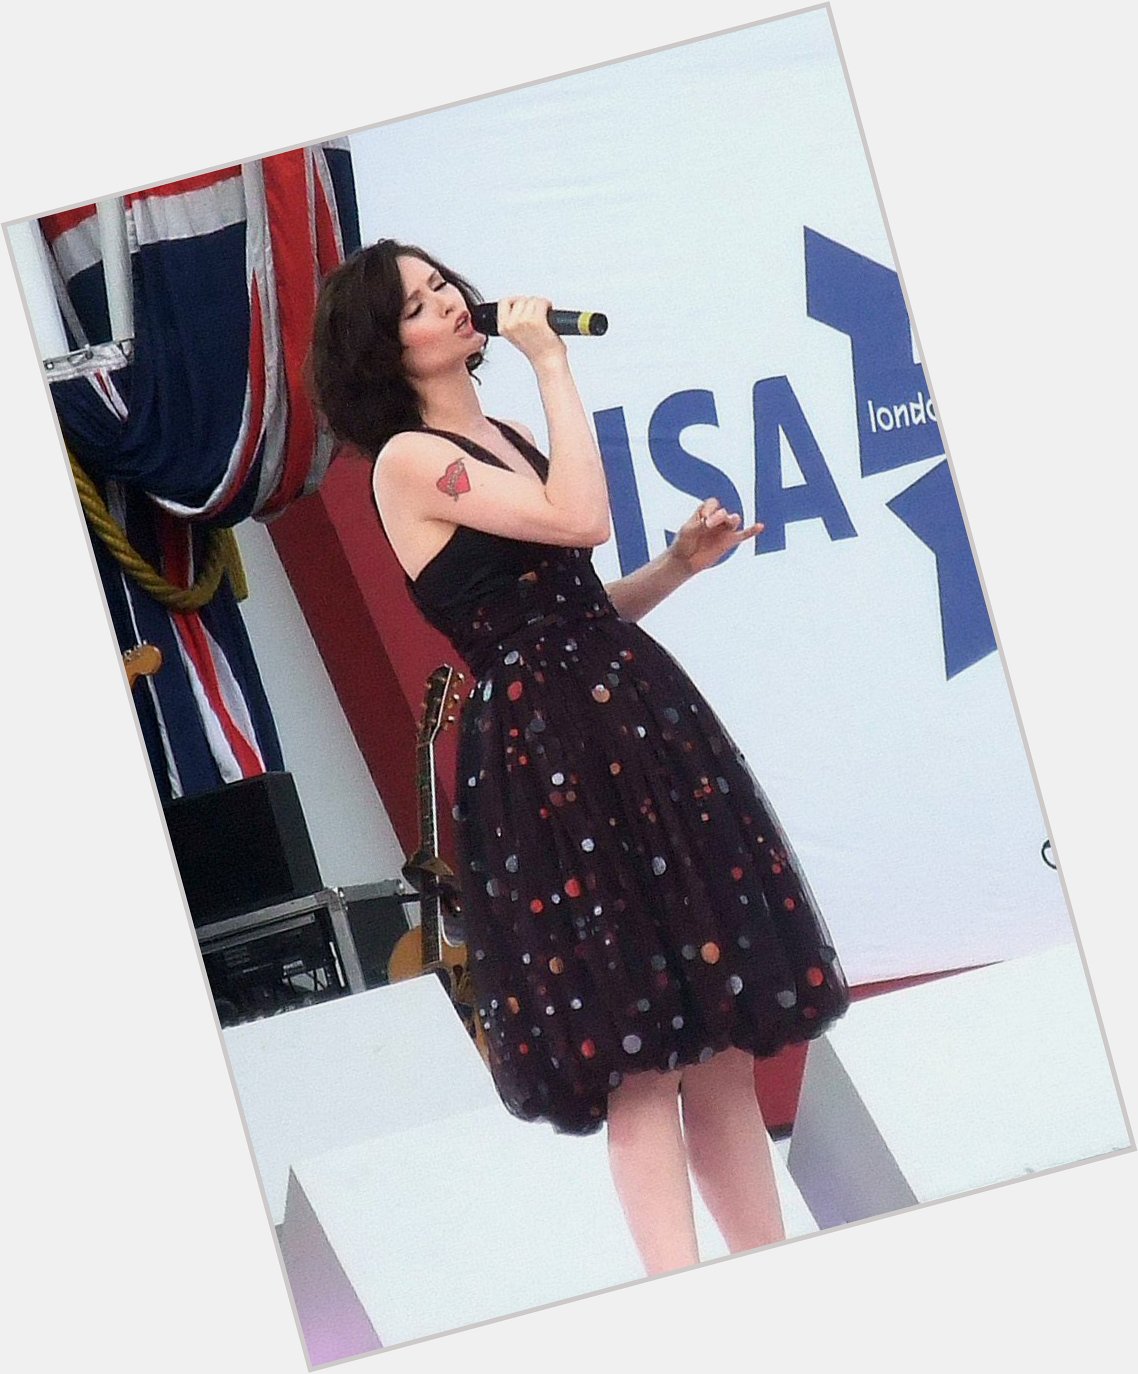 Lastly, happy birthday to Sophie Ellis-Bextor of theaudience, who also blows out the candles today. 